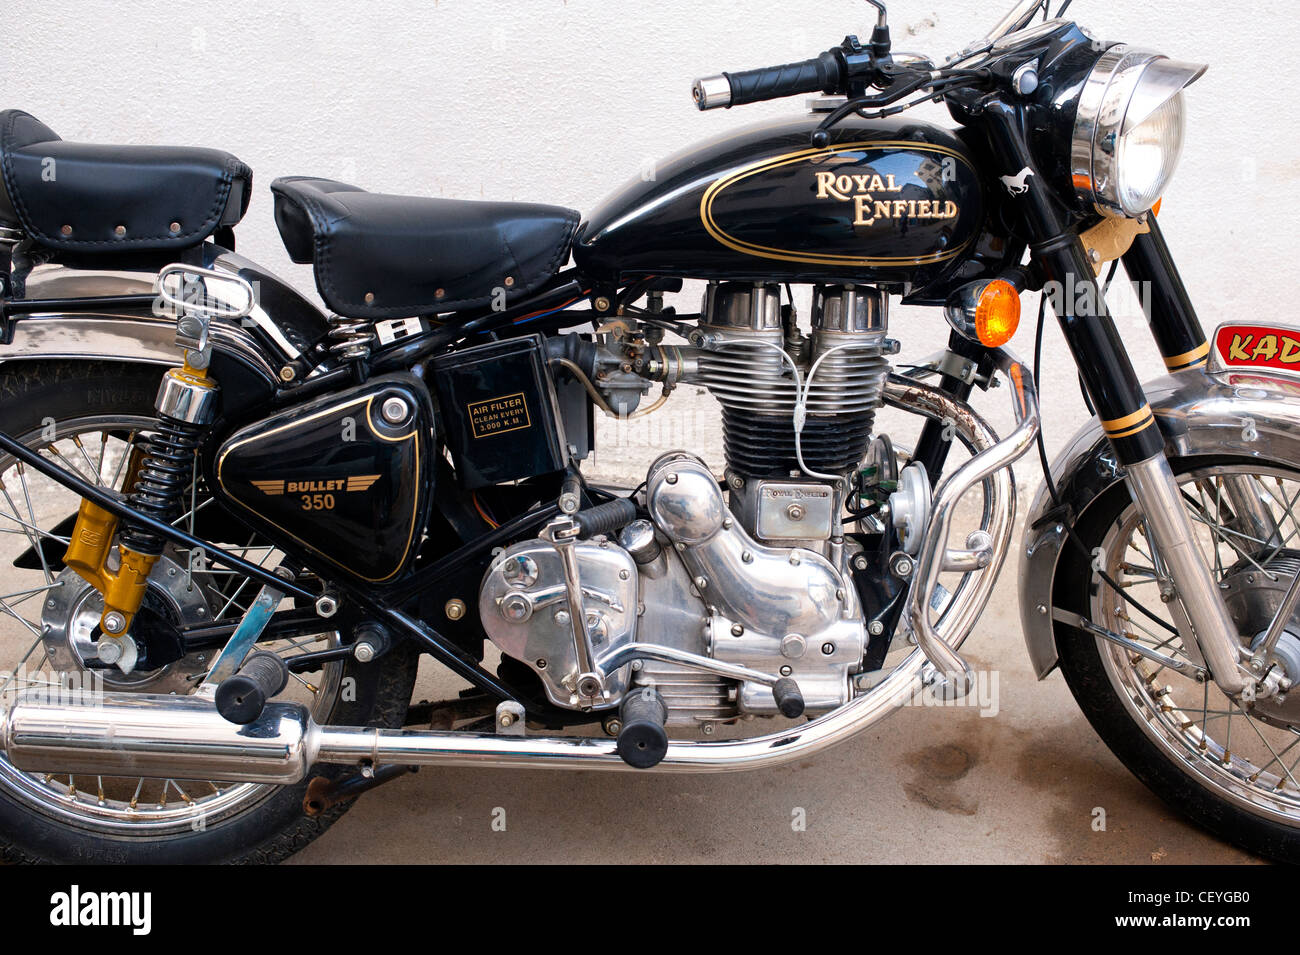 Royal Enfield bullet 350 moto. Made in India Photo Stock - Alamy